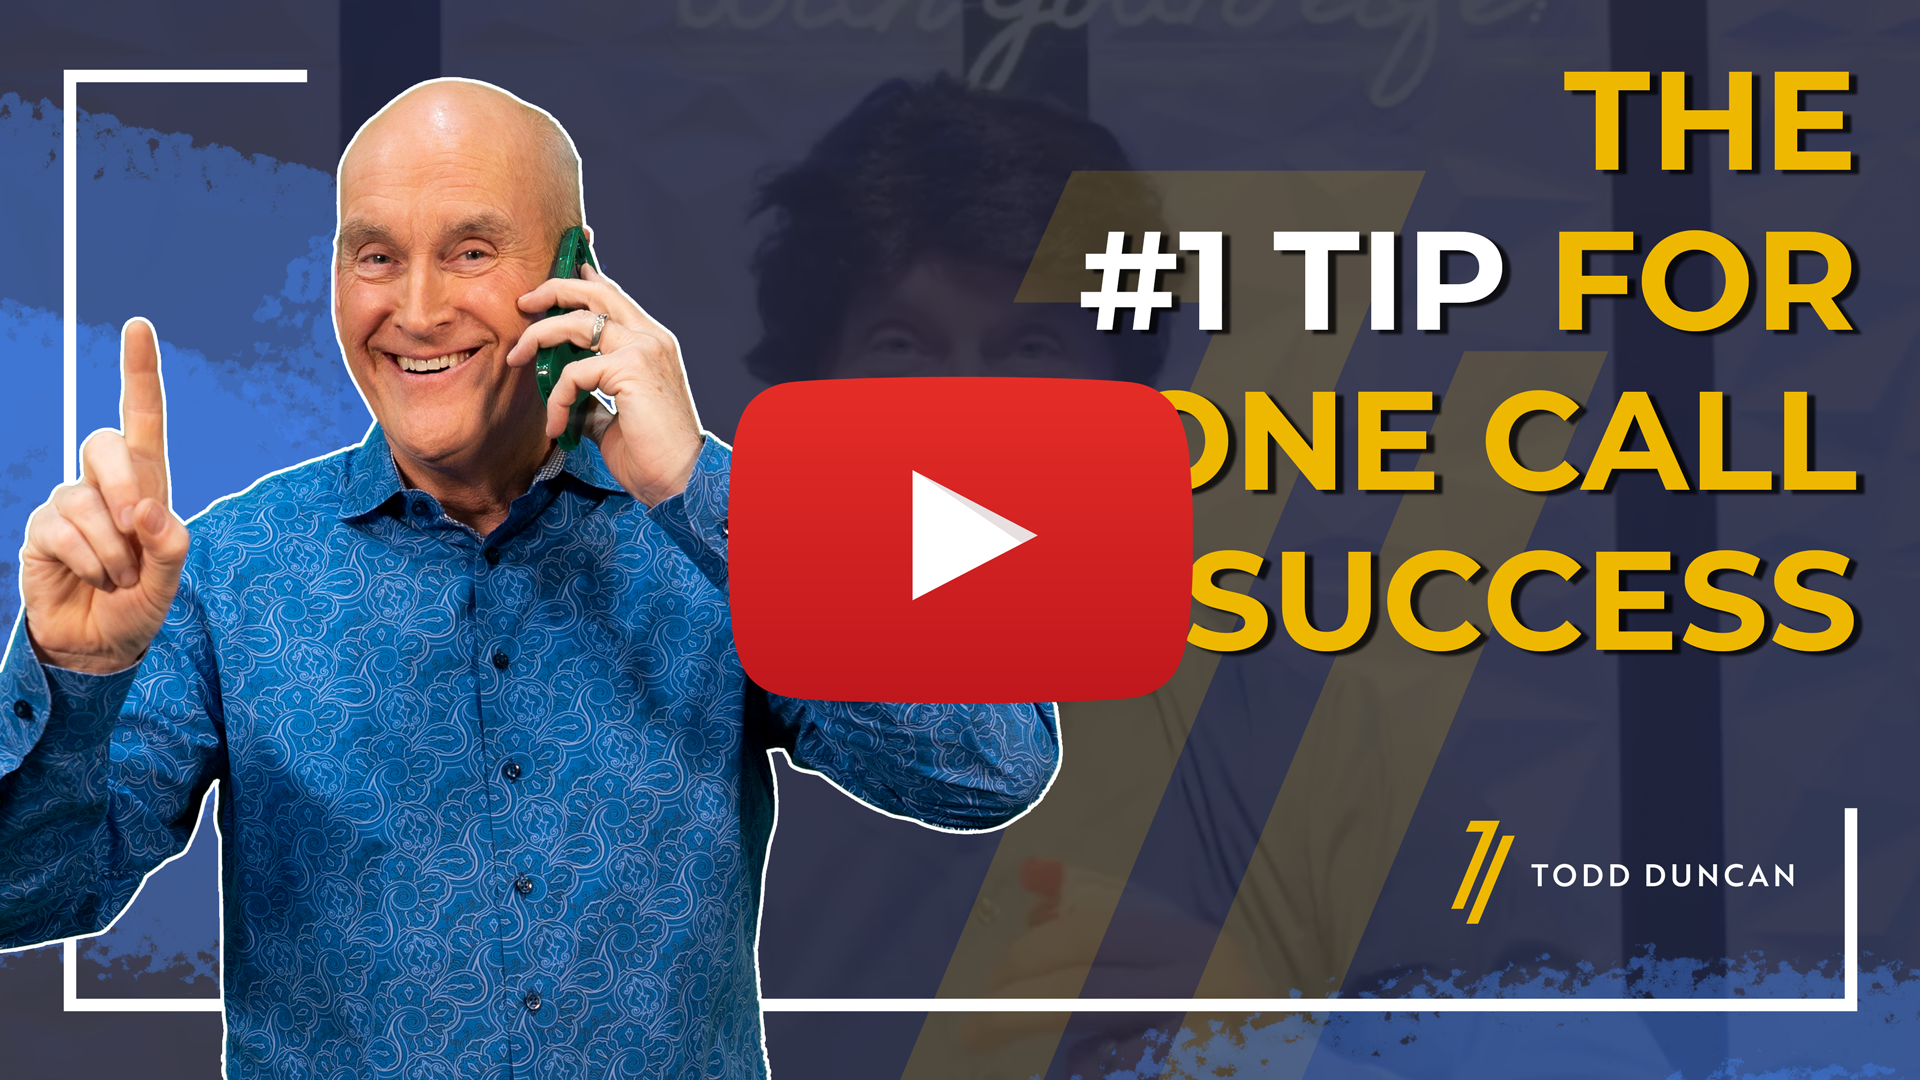 Scripting is the #1 tip to sales call success